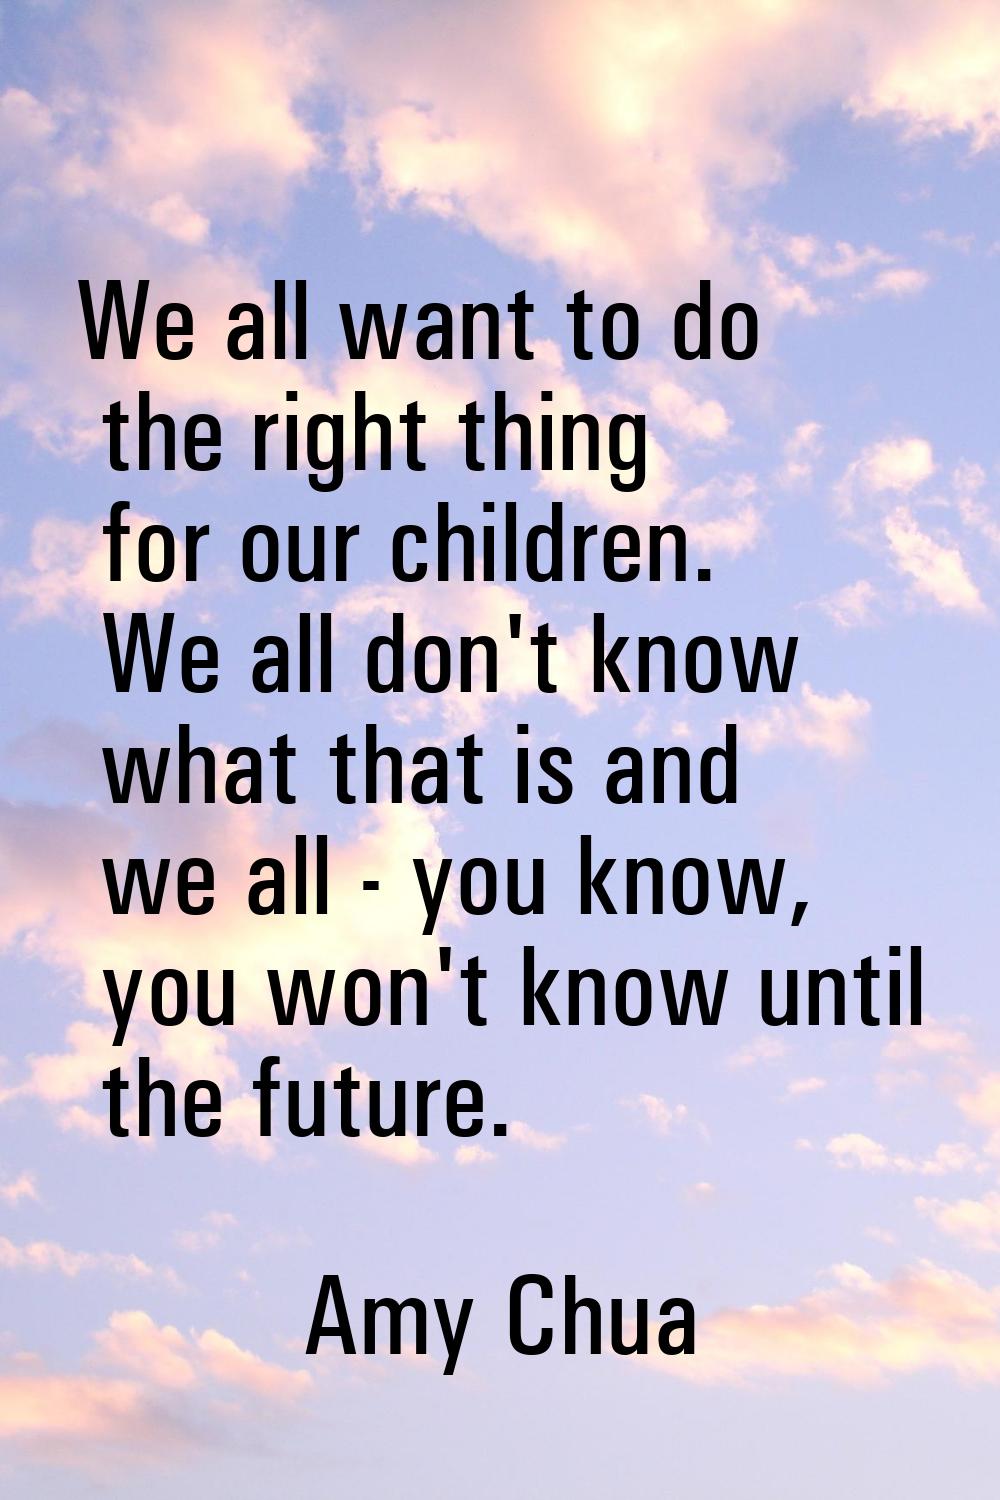 We all want to do the right thing for our children. We all don't know what that is and we all - you